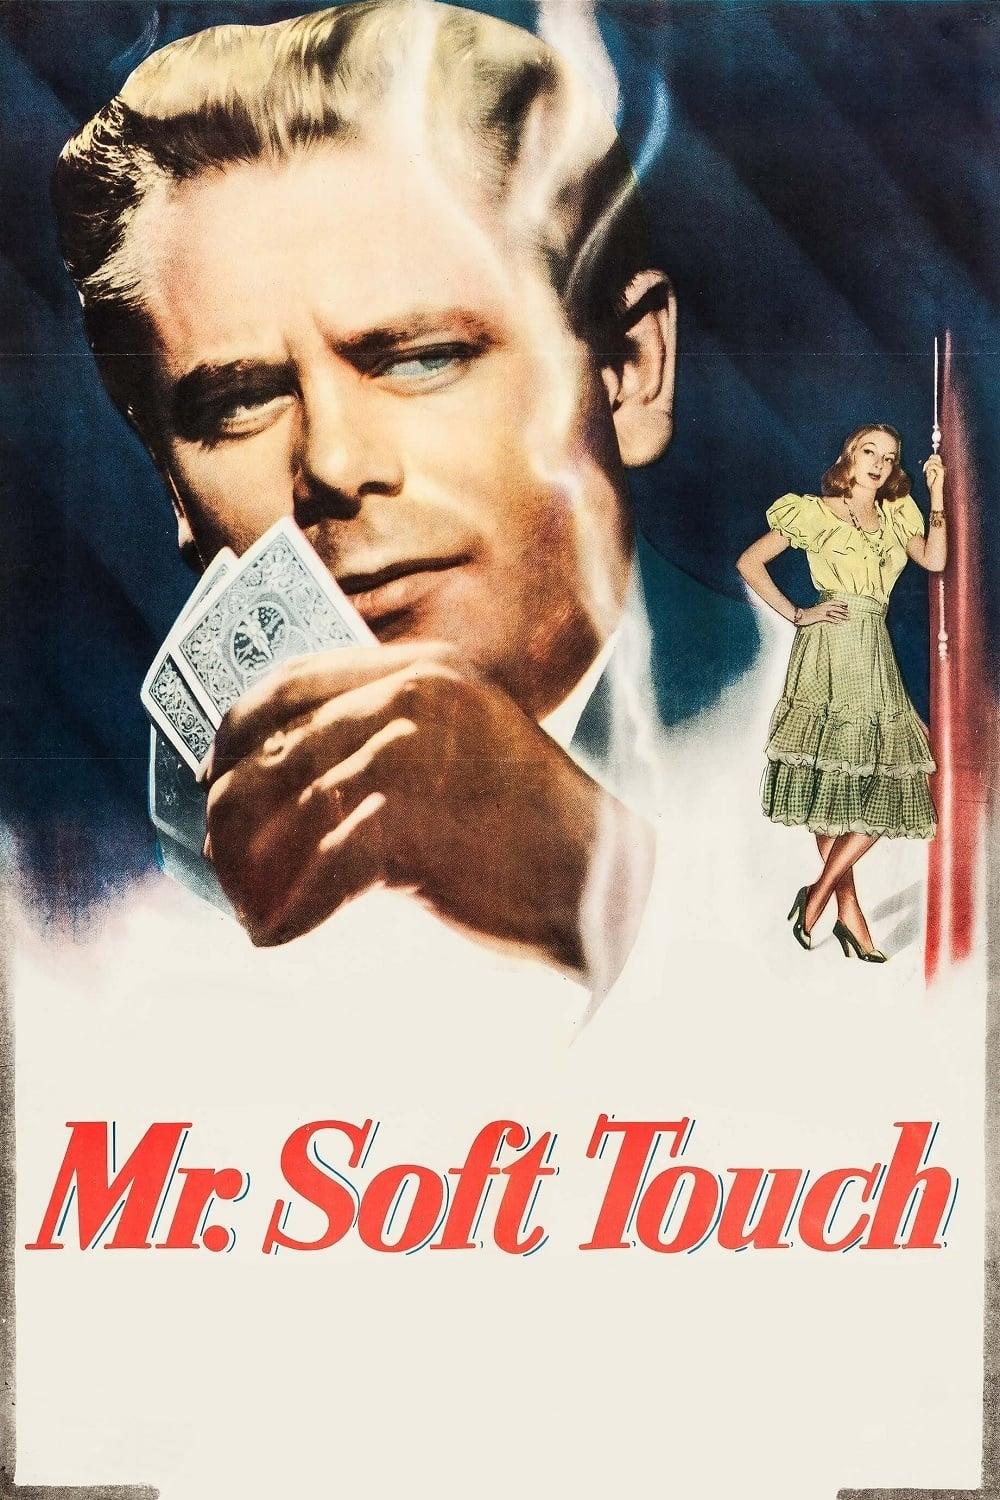 Mr. Soft Touch poster